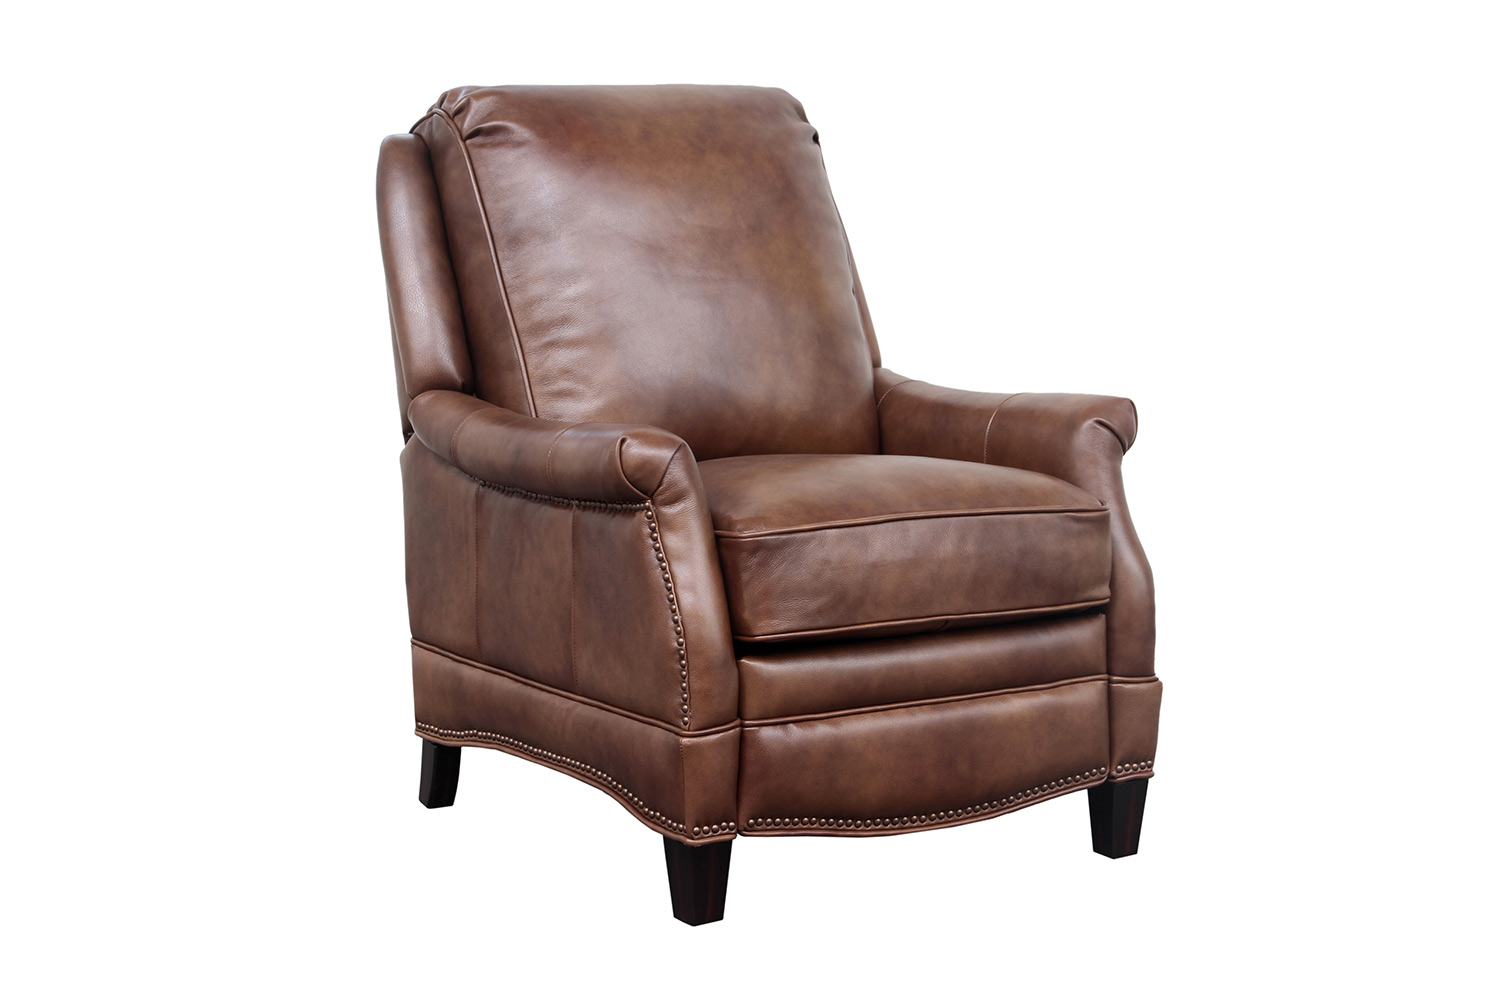 Barcalounger Ashebrooke Recliner Chair - Wenlock Tawny/All Leather